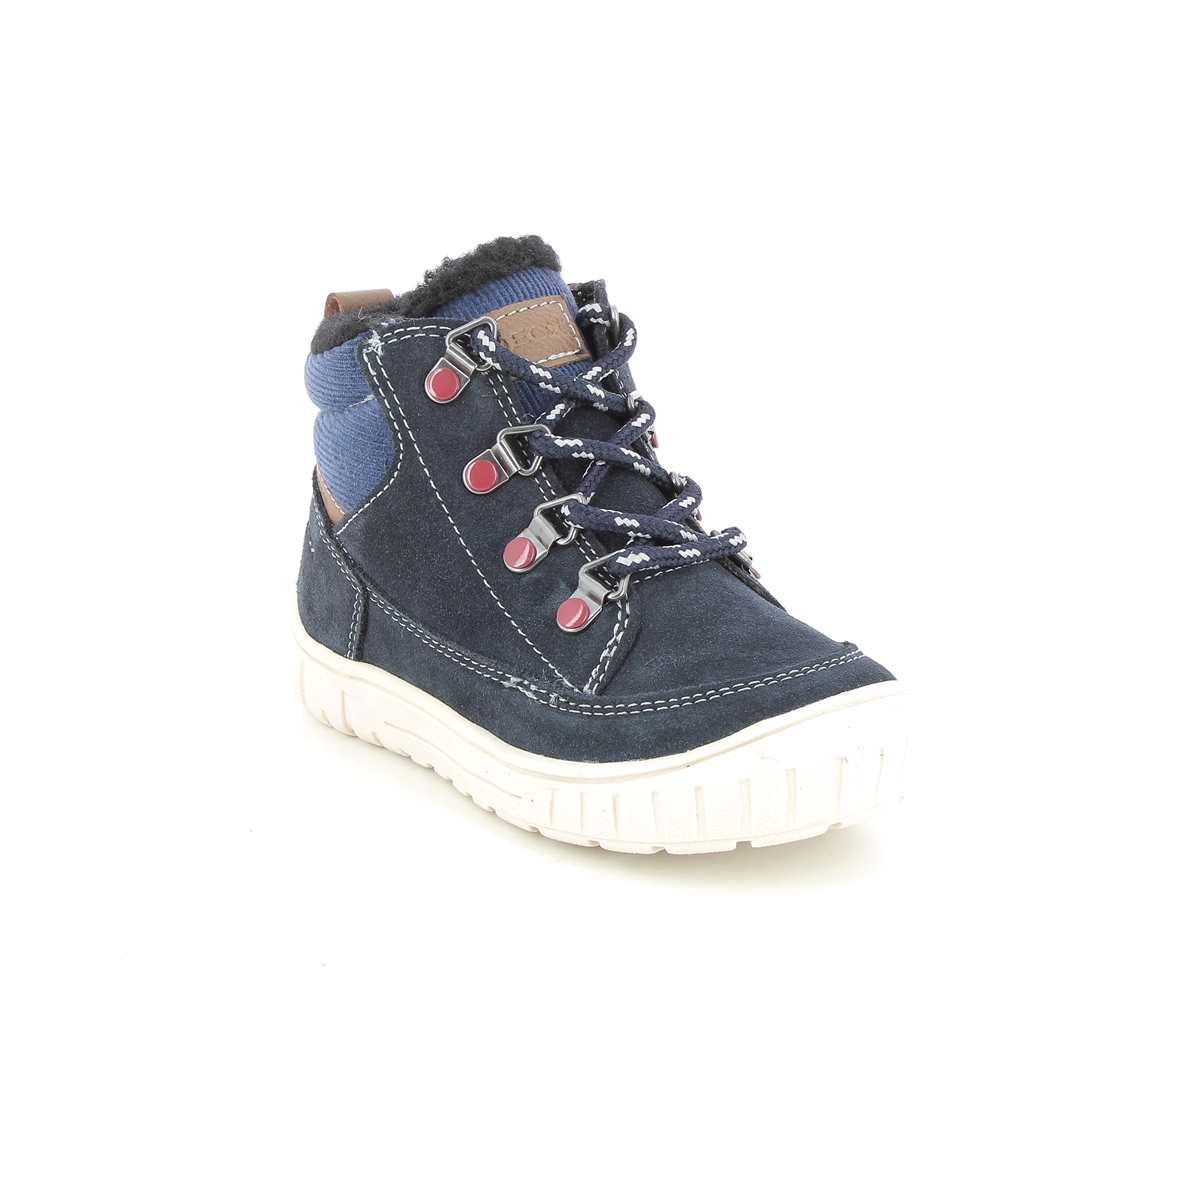 Geox Omar Boy Tex Navy Suede Kids Toddler Boys Boots B162DA-C0735 in a Plain Leather in Size 22